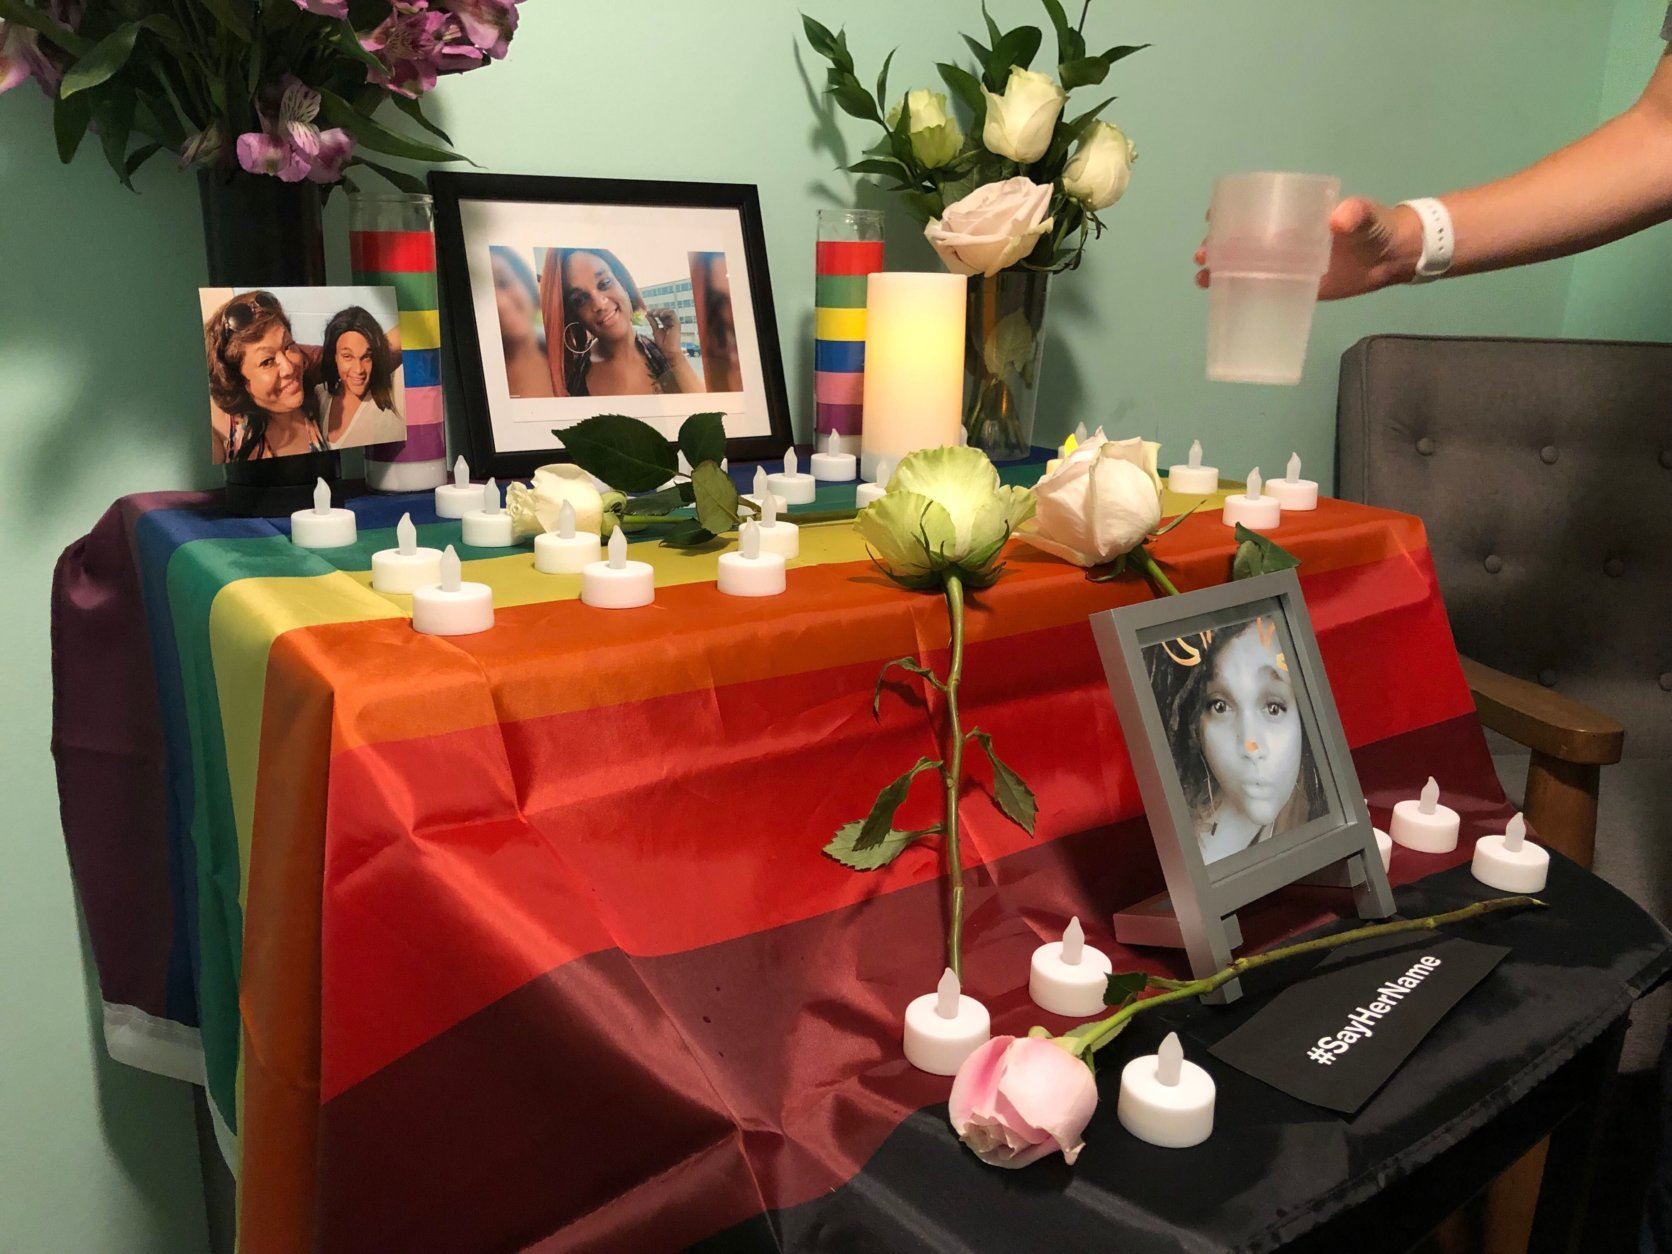 On what would have been Zoe Spears' 24th birthday on Tuesday, friends gathered at the Latin American Youth Center to remember the transgender woman who was murdered last week. (WTOP/Kristi King)